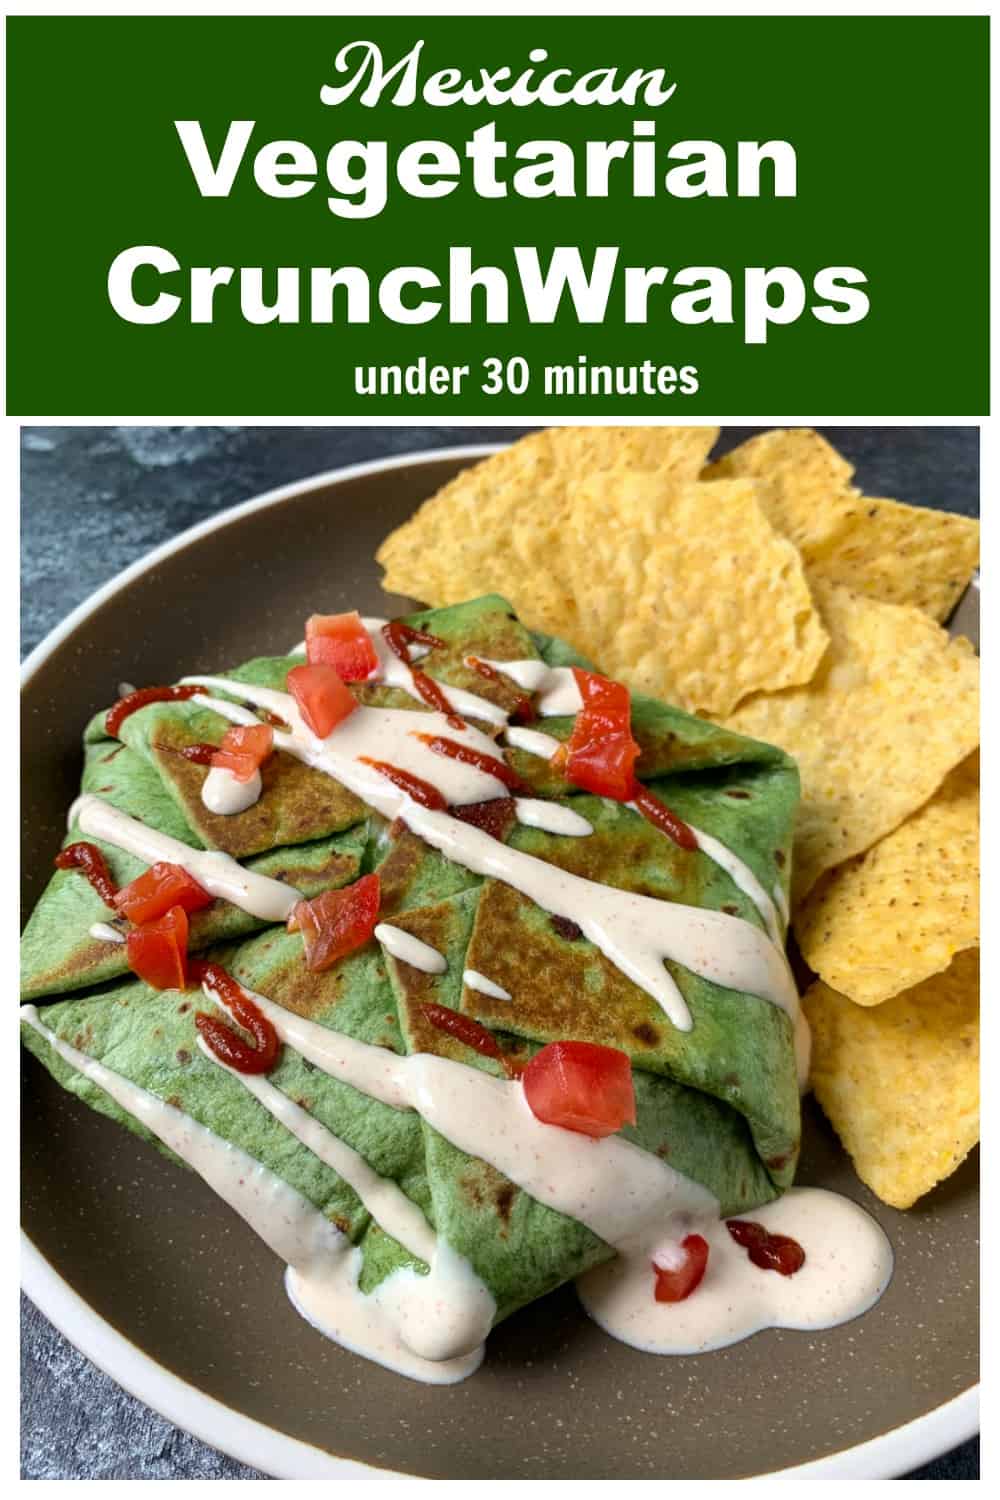 Taco bell style Vegetarian Crunchwrap Supreme without meat